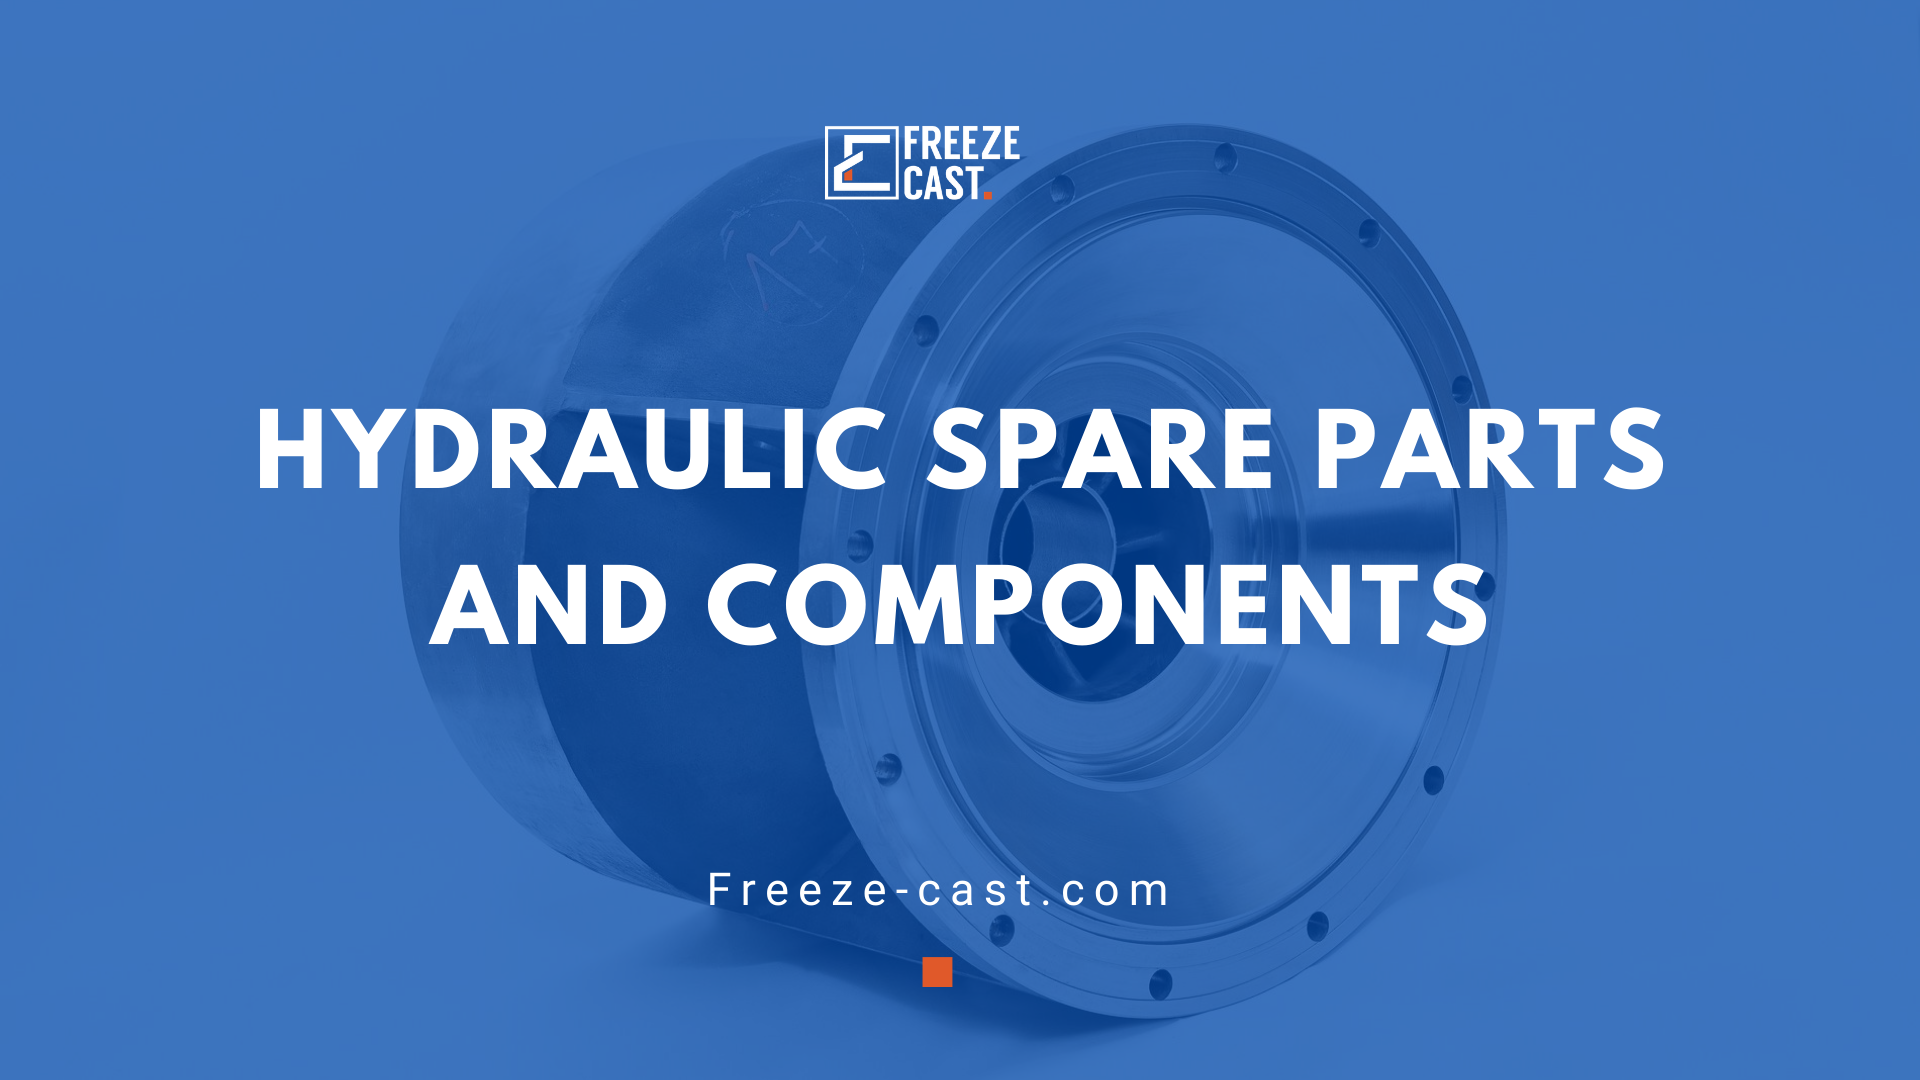 Hydraulic spare parts and components